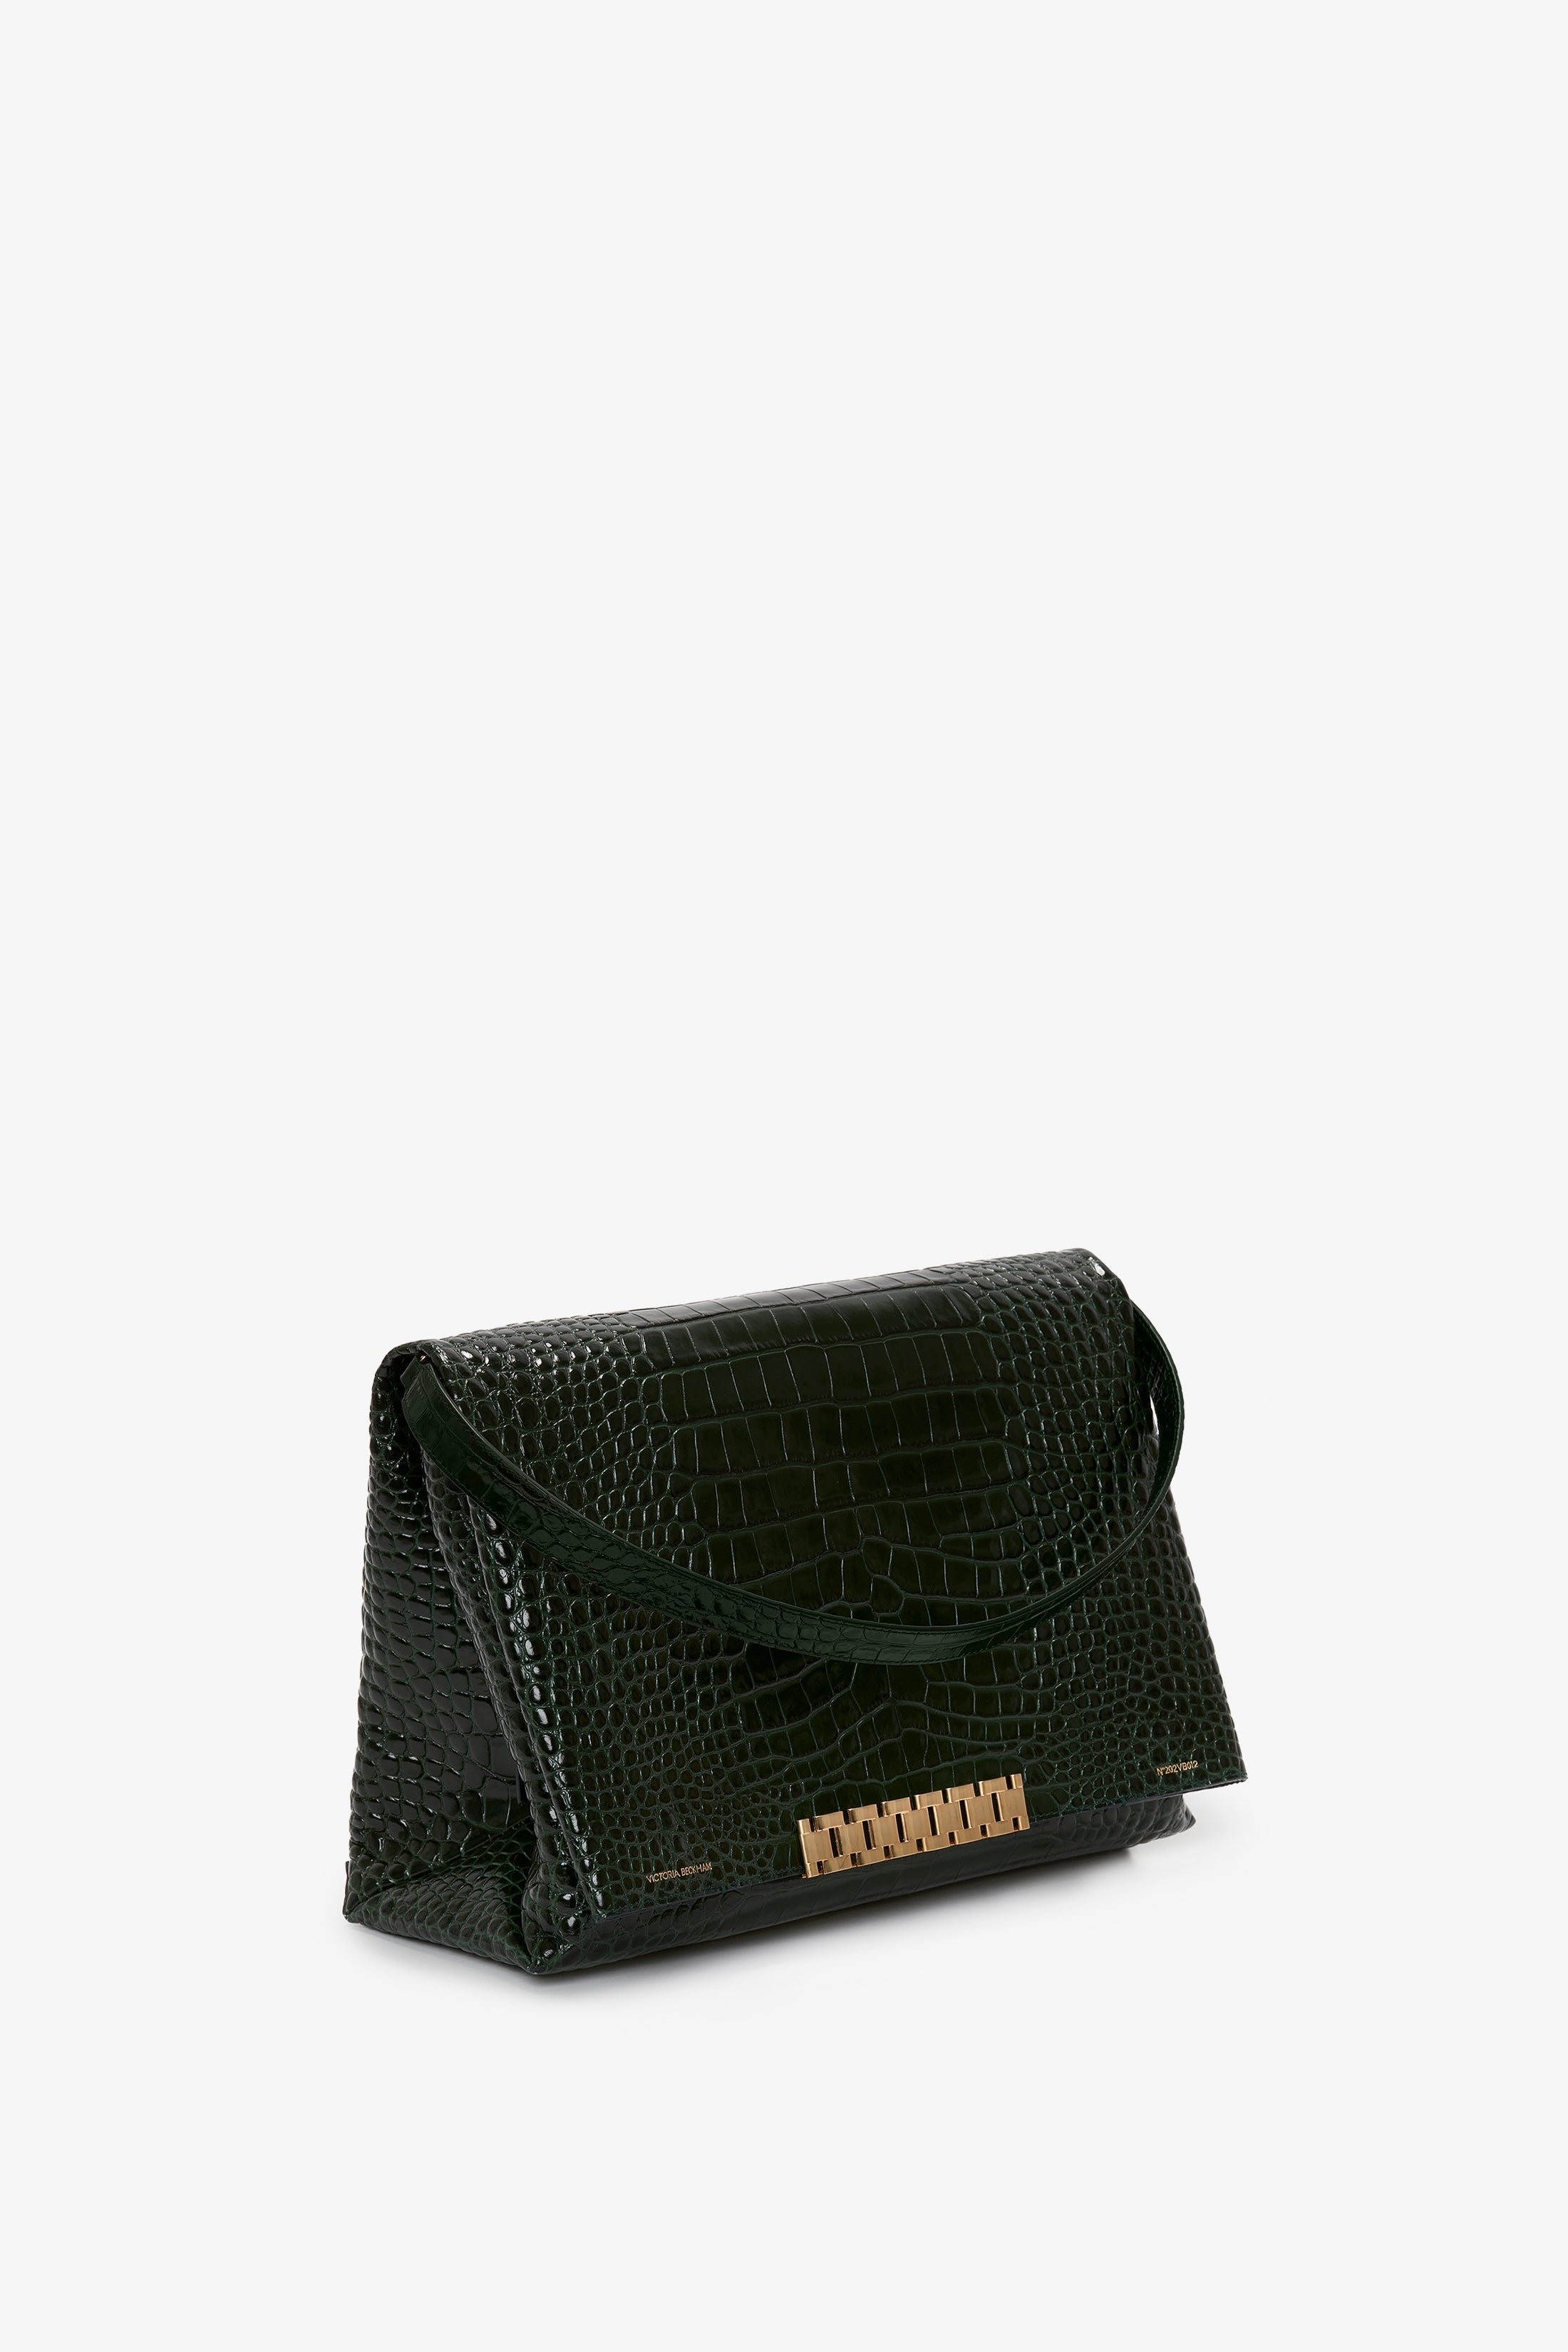 Jumbo Chain Pouch in Dark Forest Croc Leather - 3